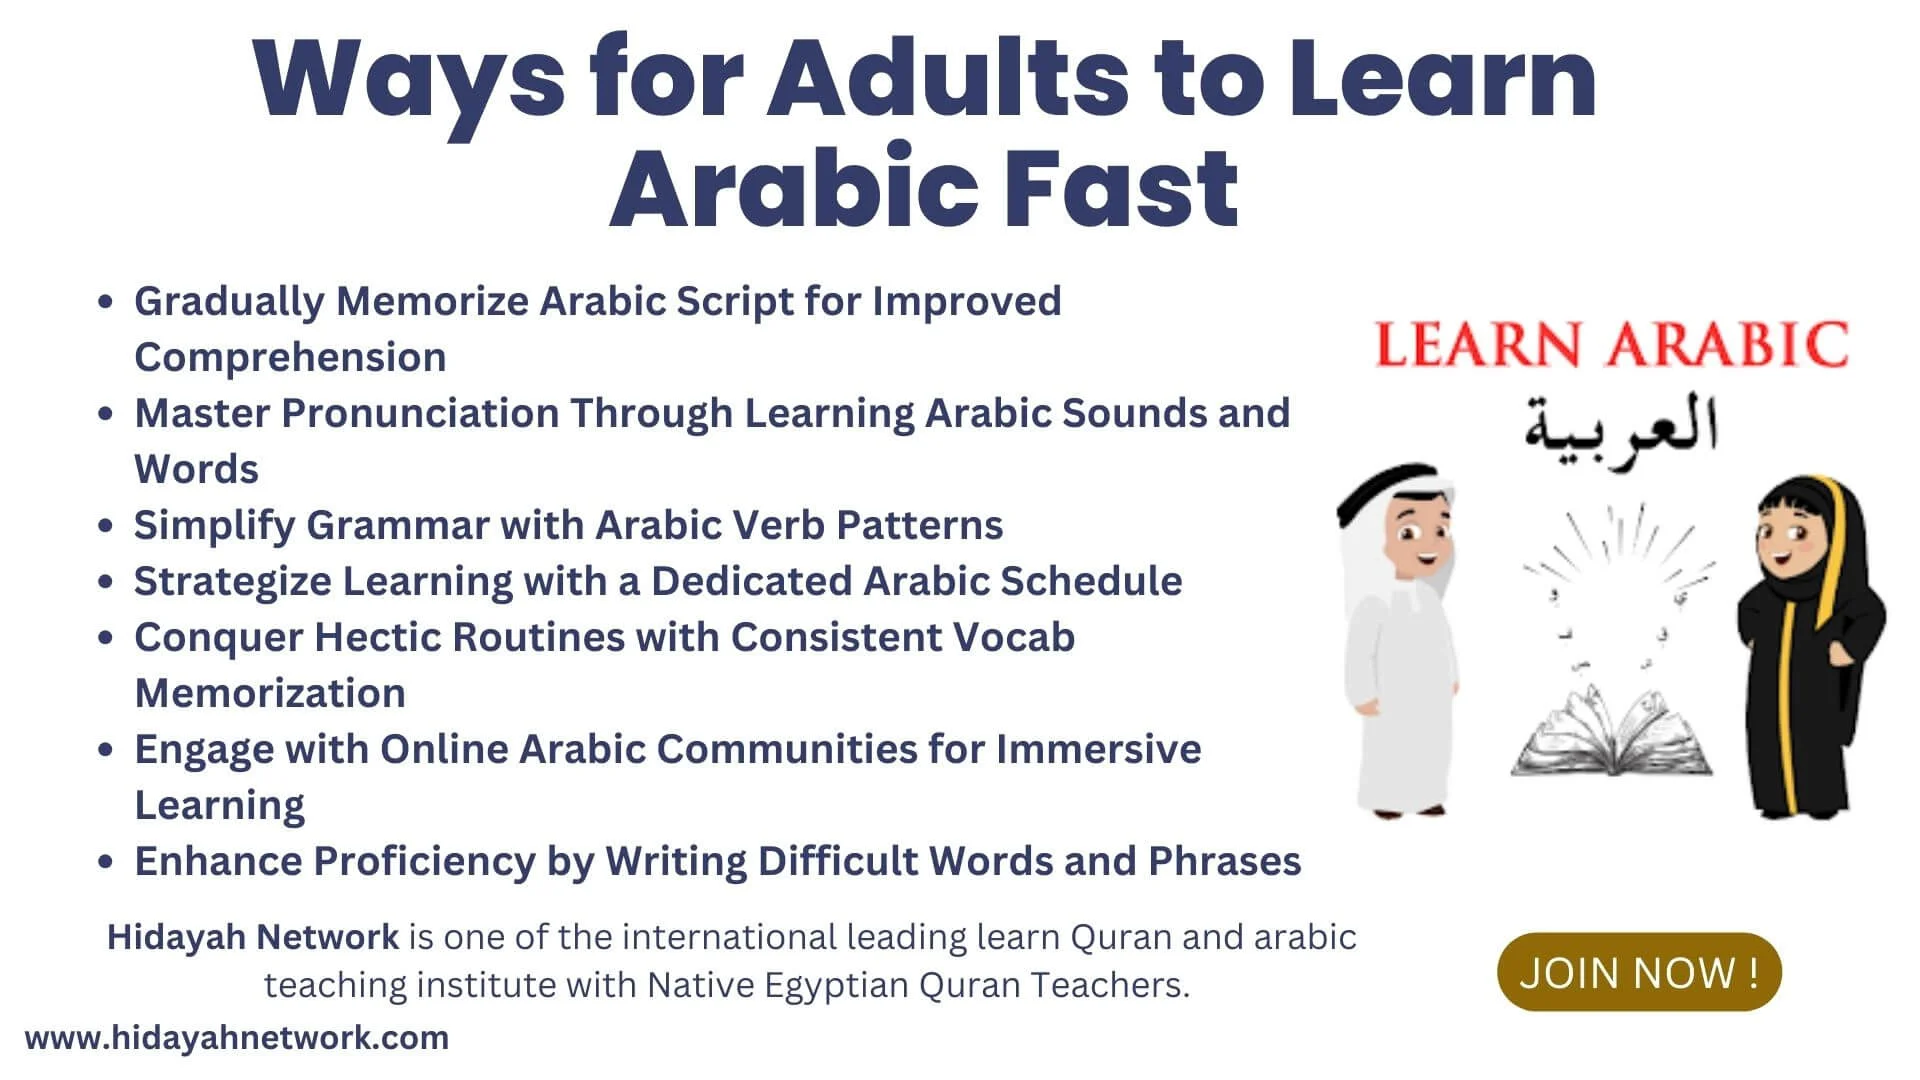 How Can Adults Learn Arabic Fast? Read Practical Tips